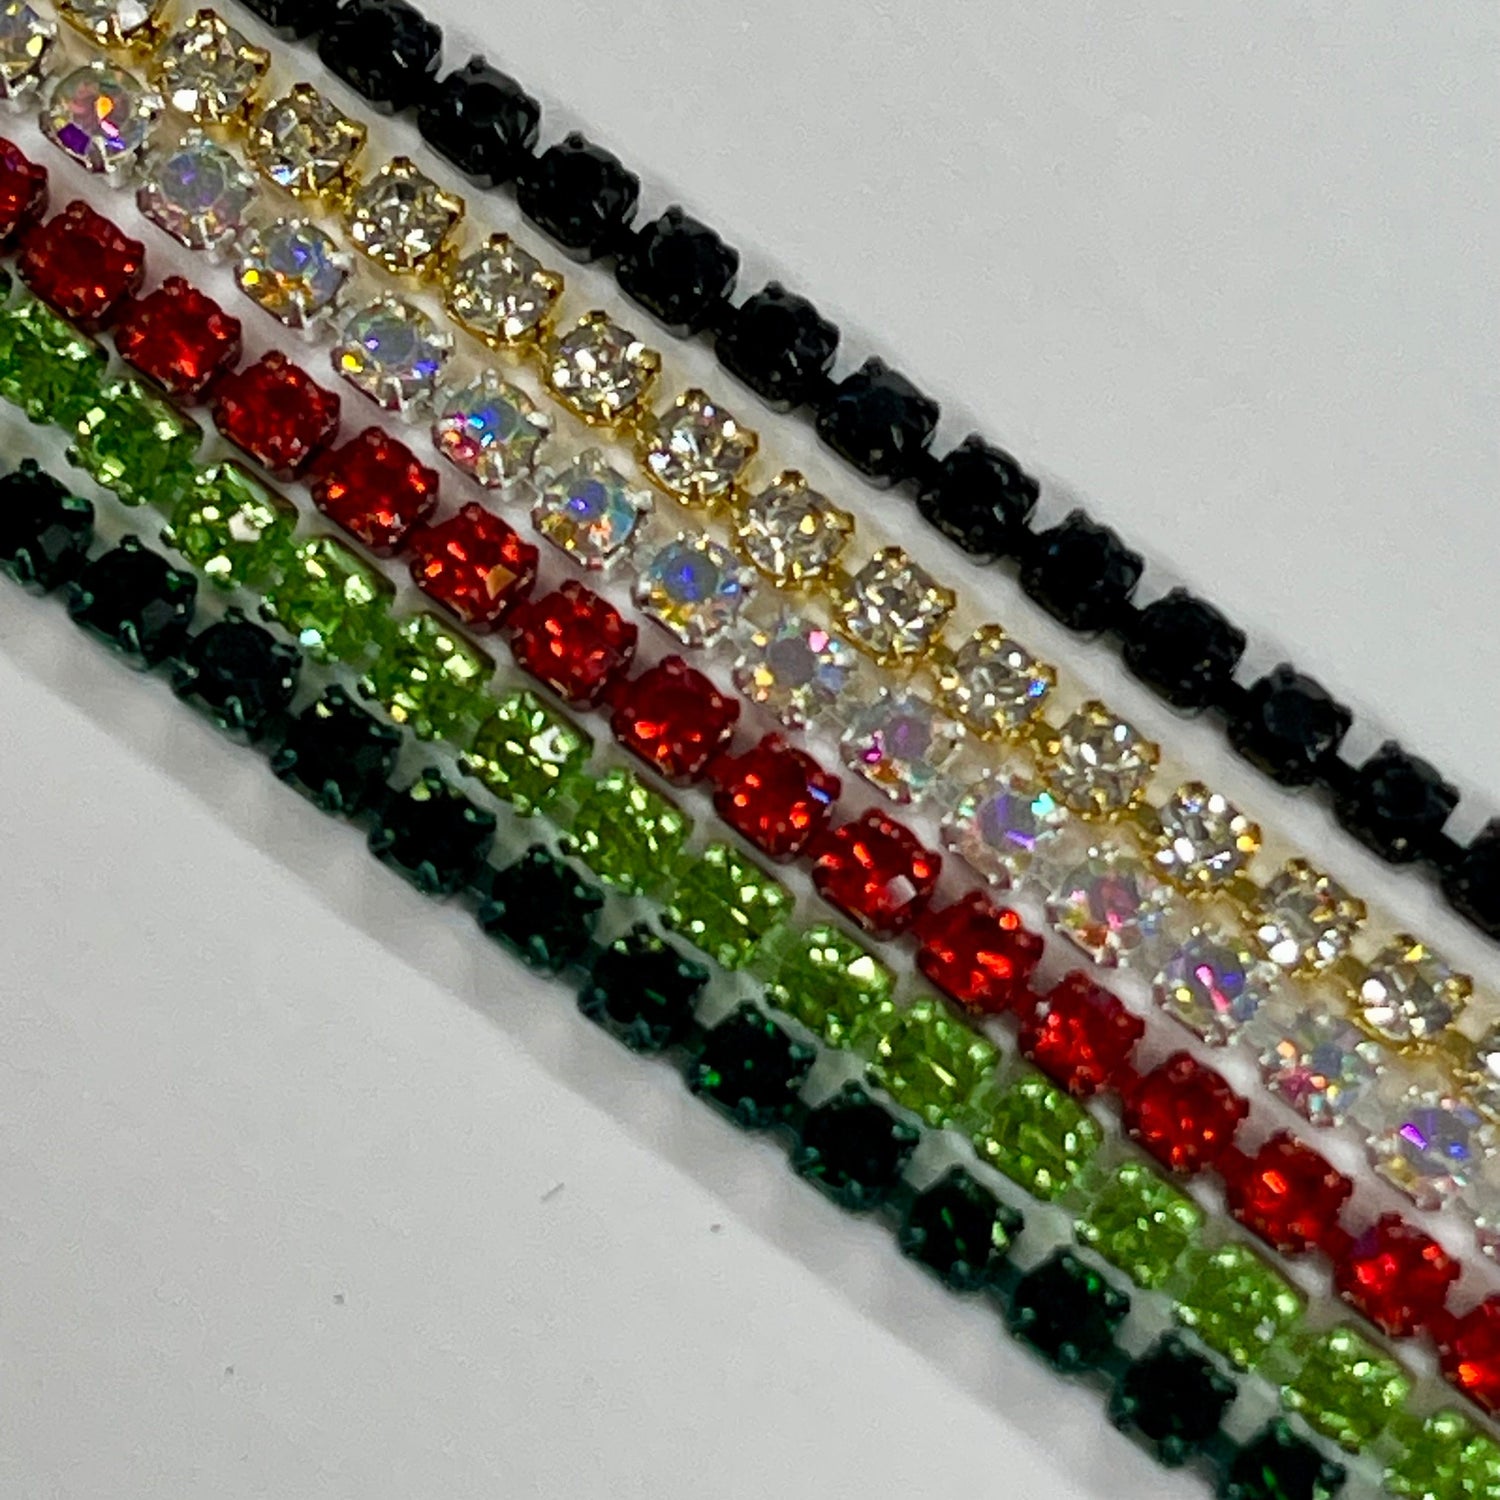 "Strawberry Mix" 6 x 1 yard Ss6 Mixed Coloured Metal Rhinestone Metal Set, Summer Promotions Promotions